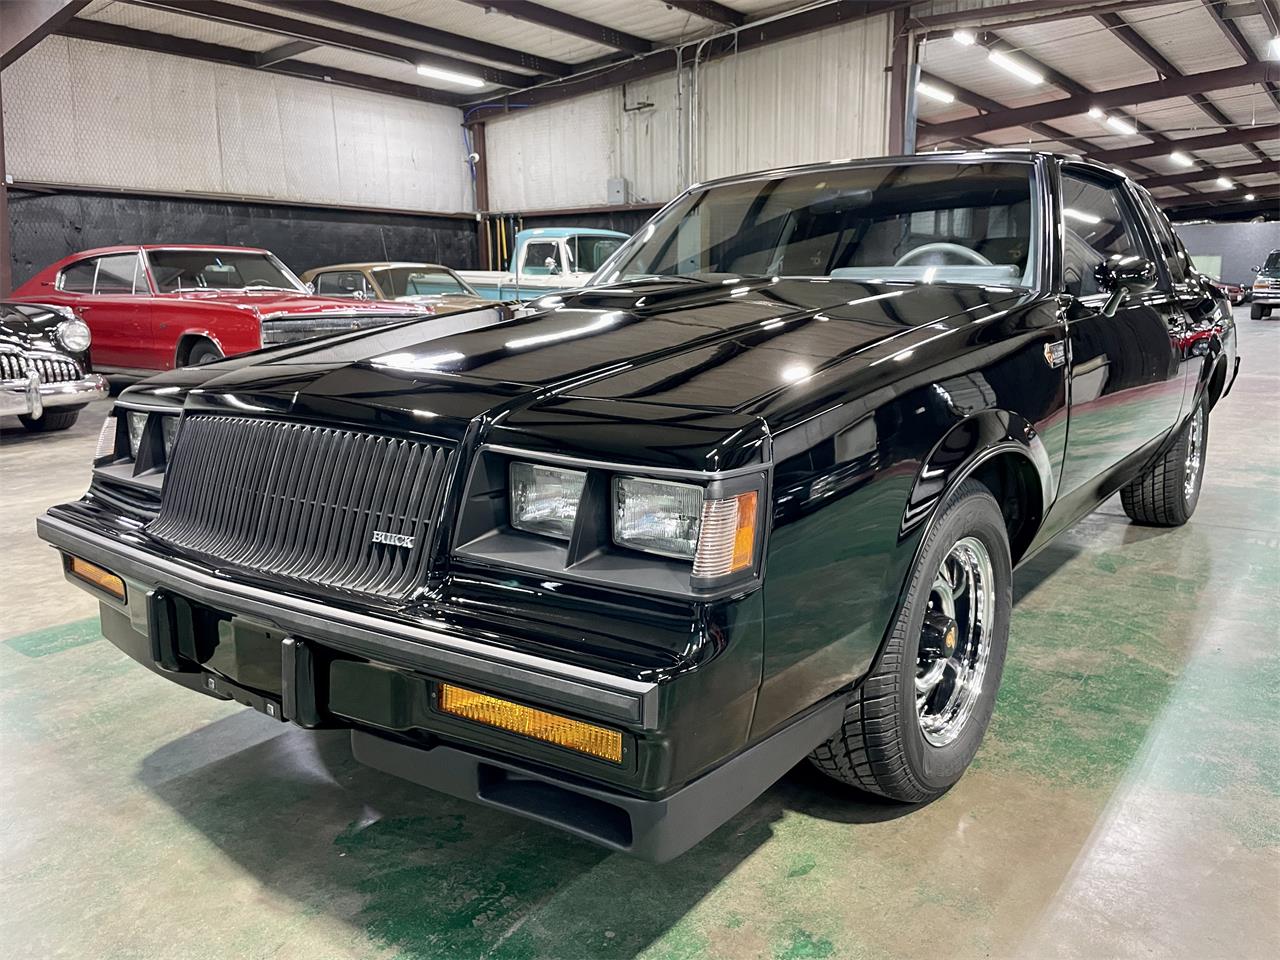 for sale 1987 buick grand national in sherman, texas for sale in sherman, tx